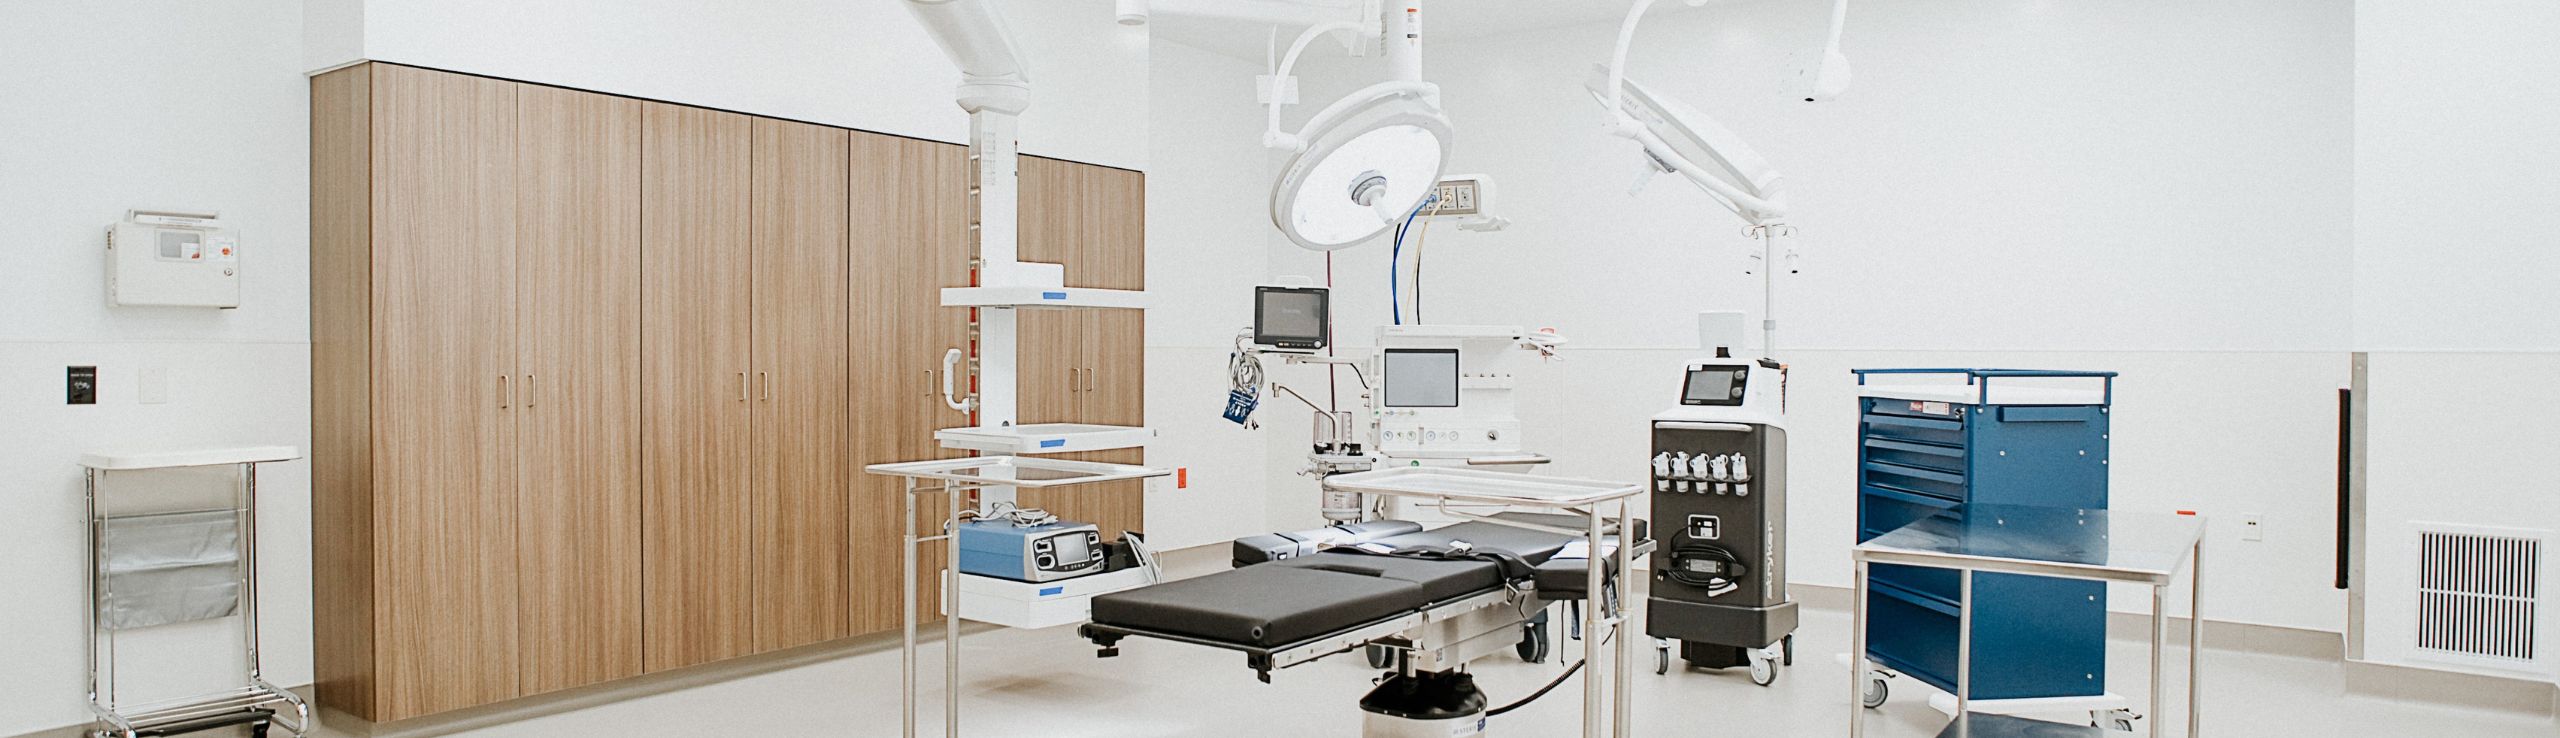 Surgical room at Hegg Health.